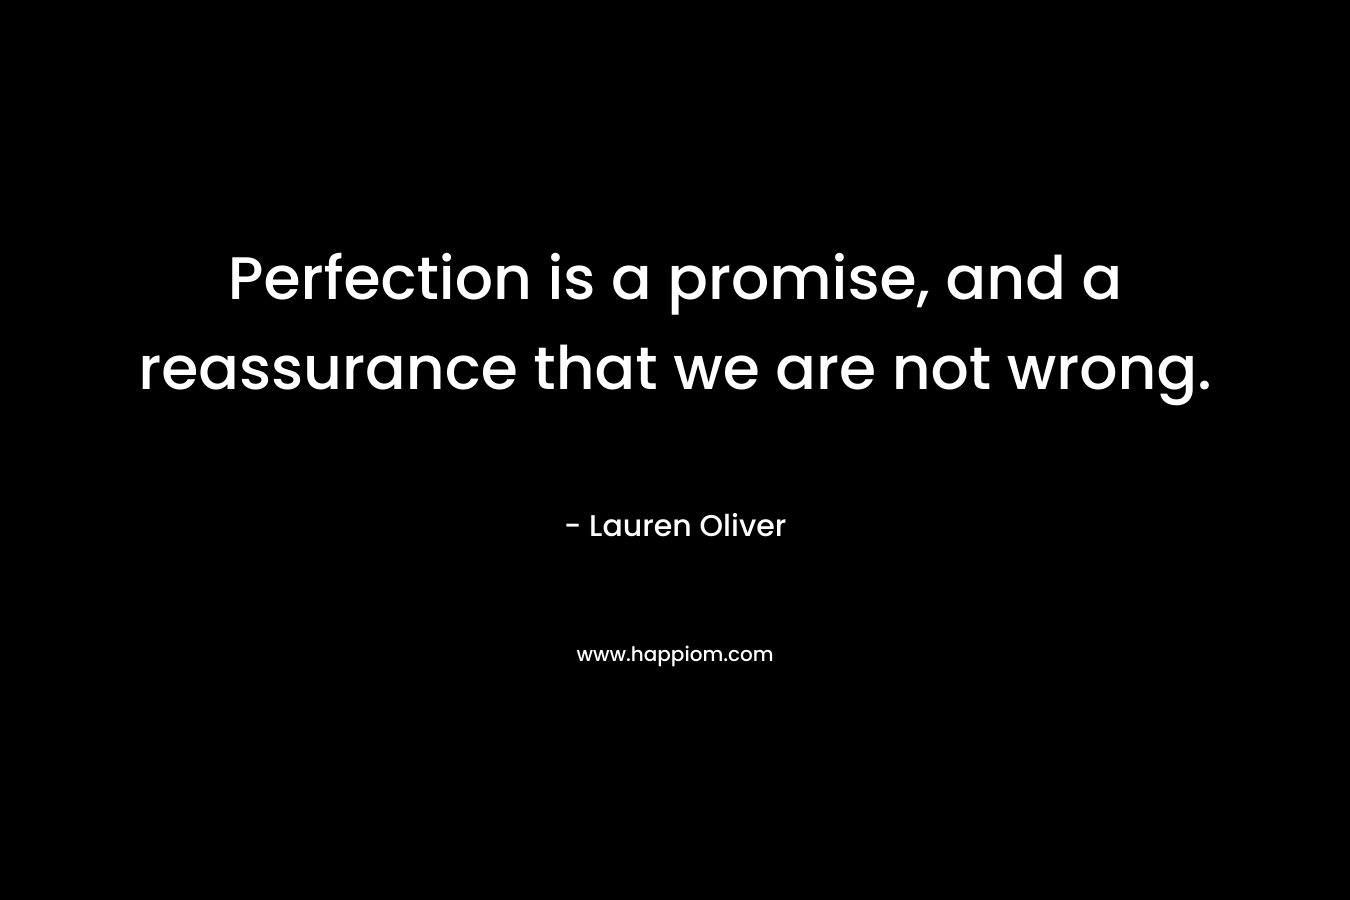 Perfection is a promise, and a reassurance that we are not wrong. – Lauren Oliver